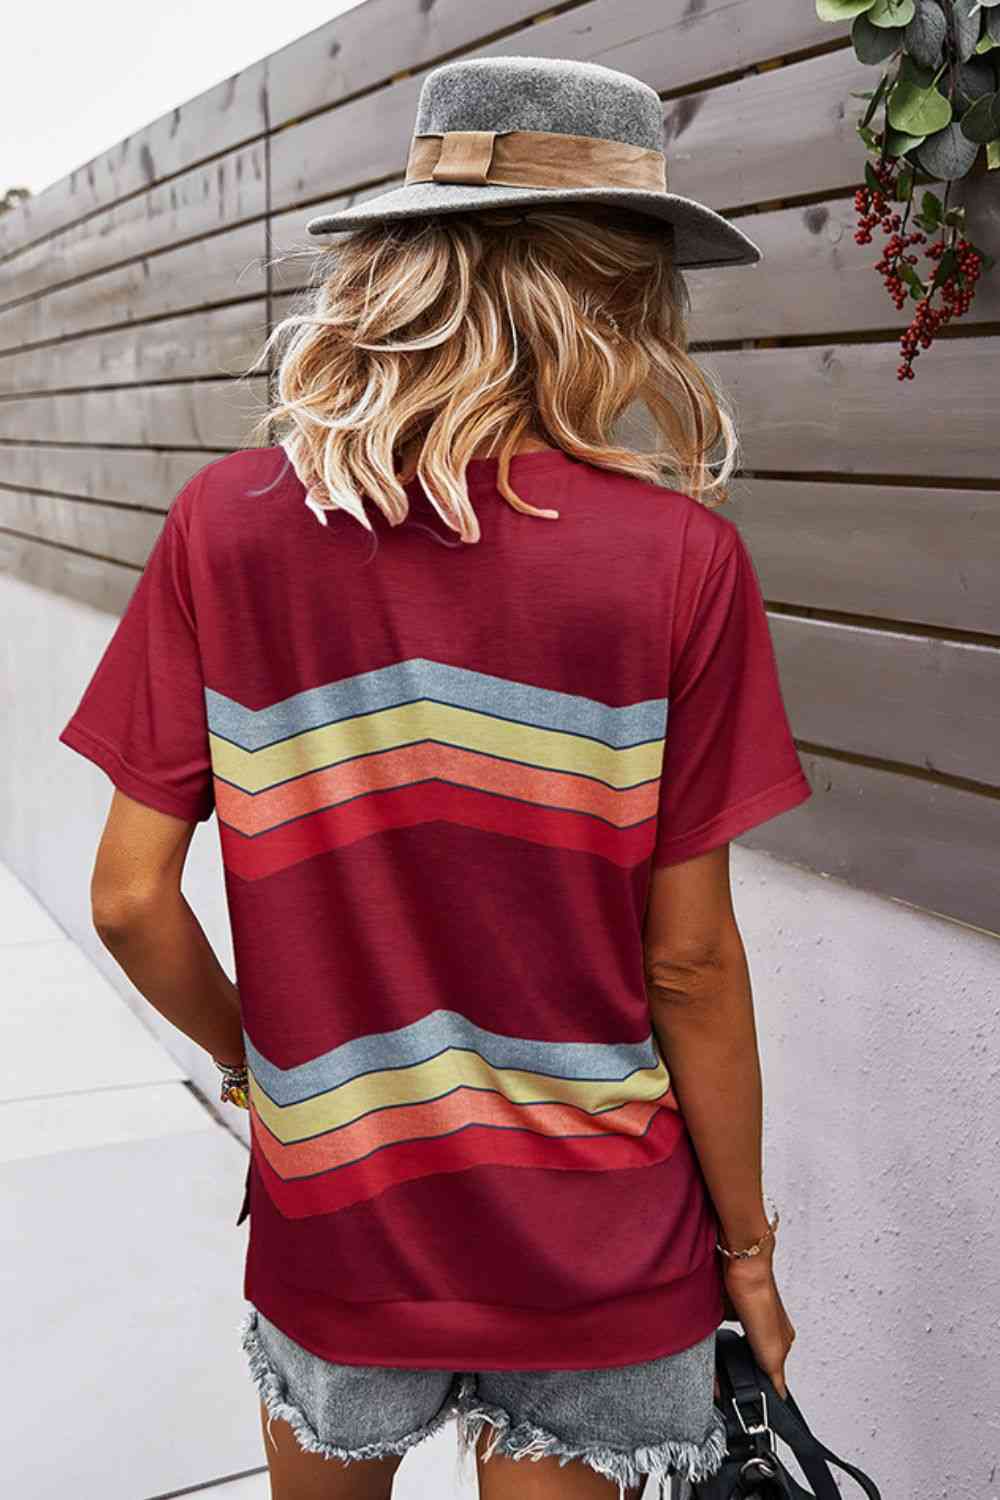 Multicolored Chevron Stripe Round Neck Side Slit T-Shirt - Shop Tophatter Deals, Electronics, Fashion, Jewelry, Health, Beauty, Home Decor, Free Shipping